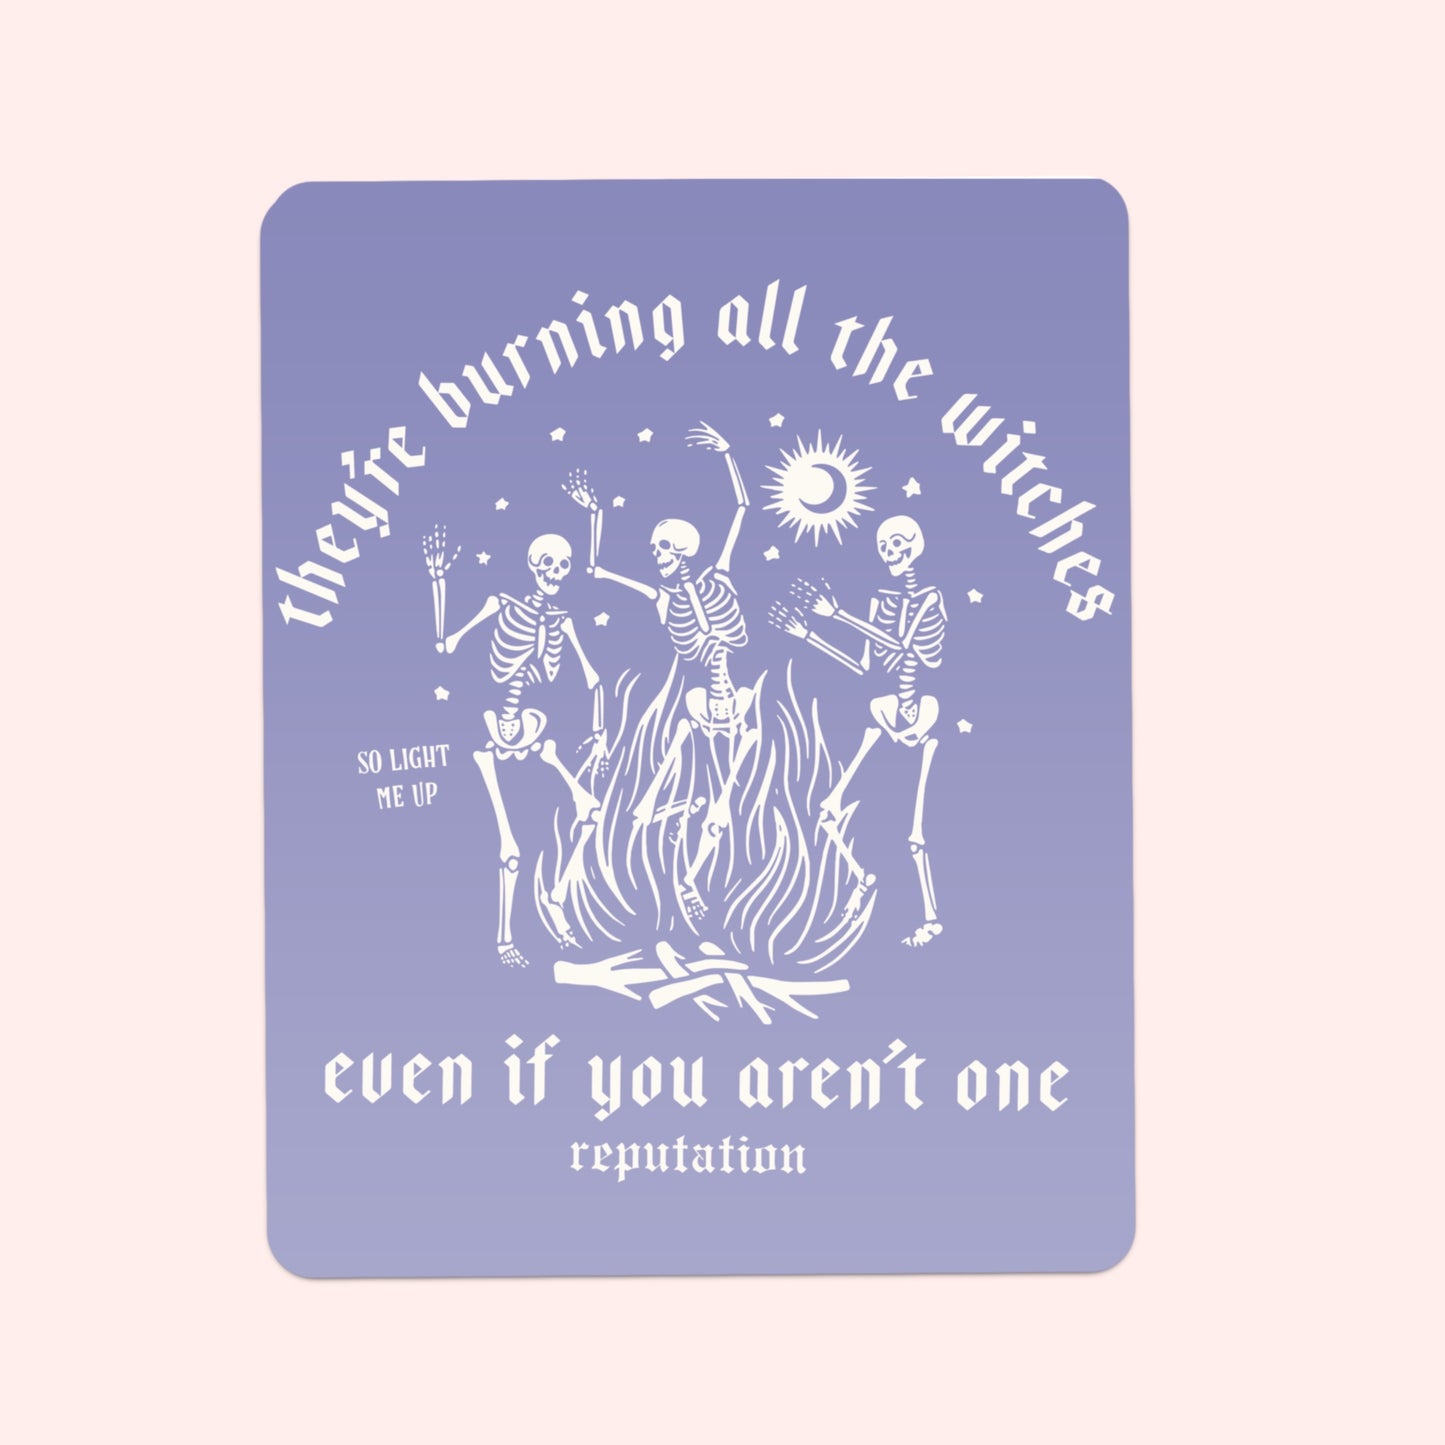 Reputation Lyric Sticker: They're Burning all the Witches